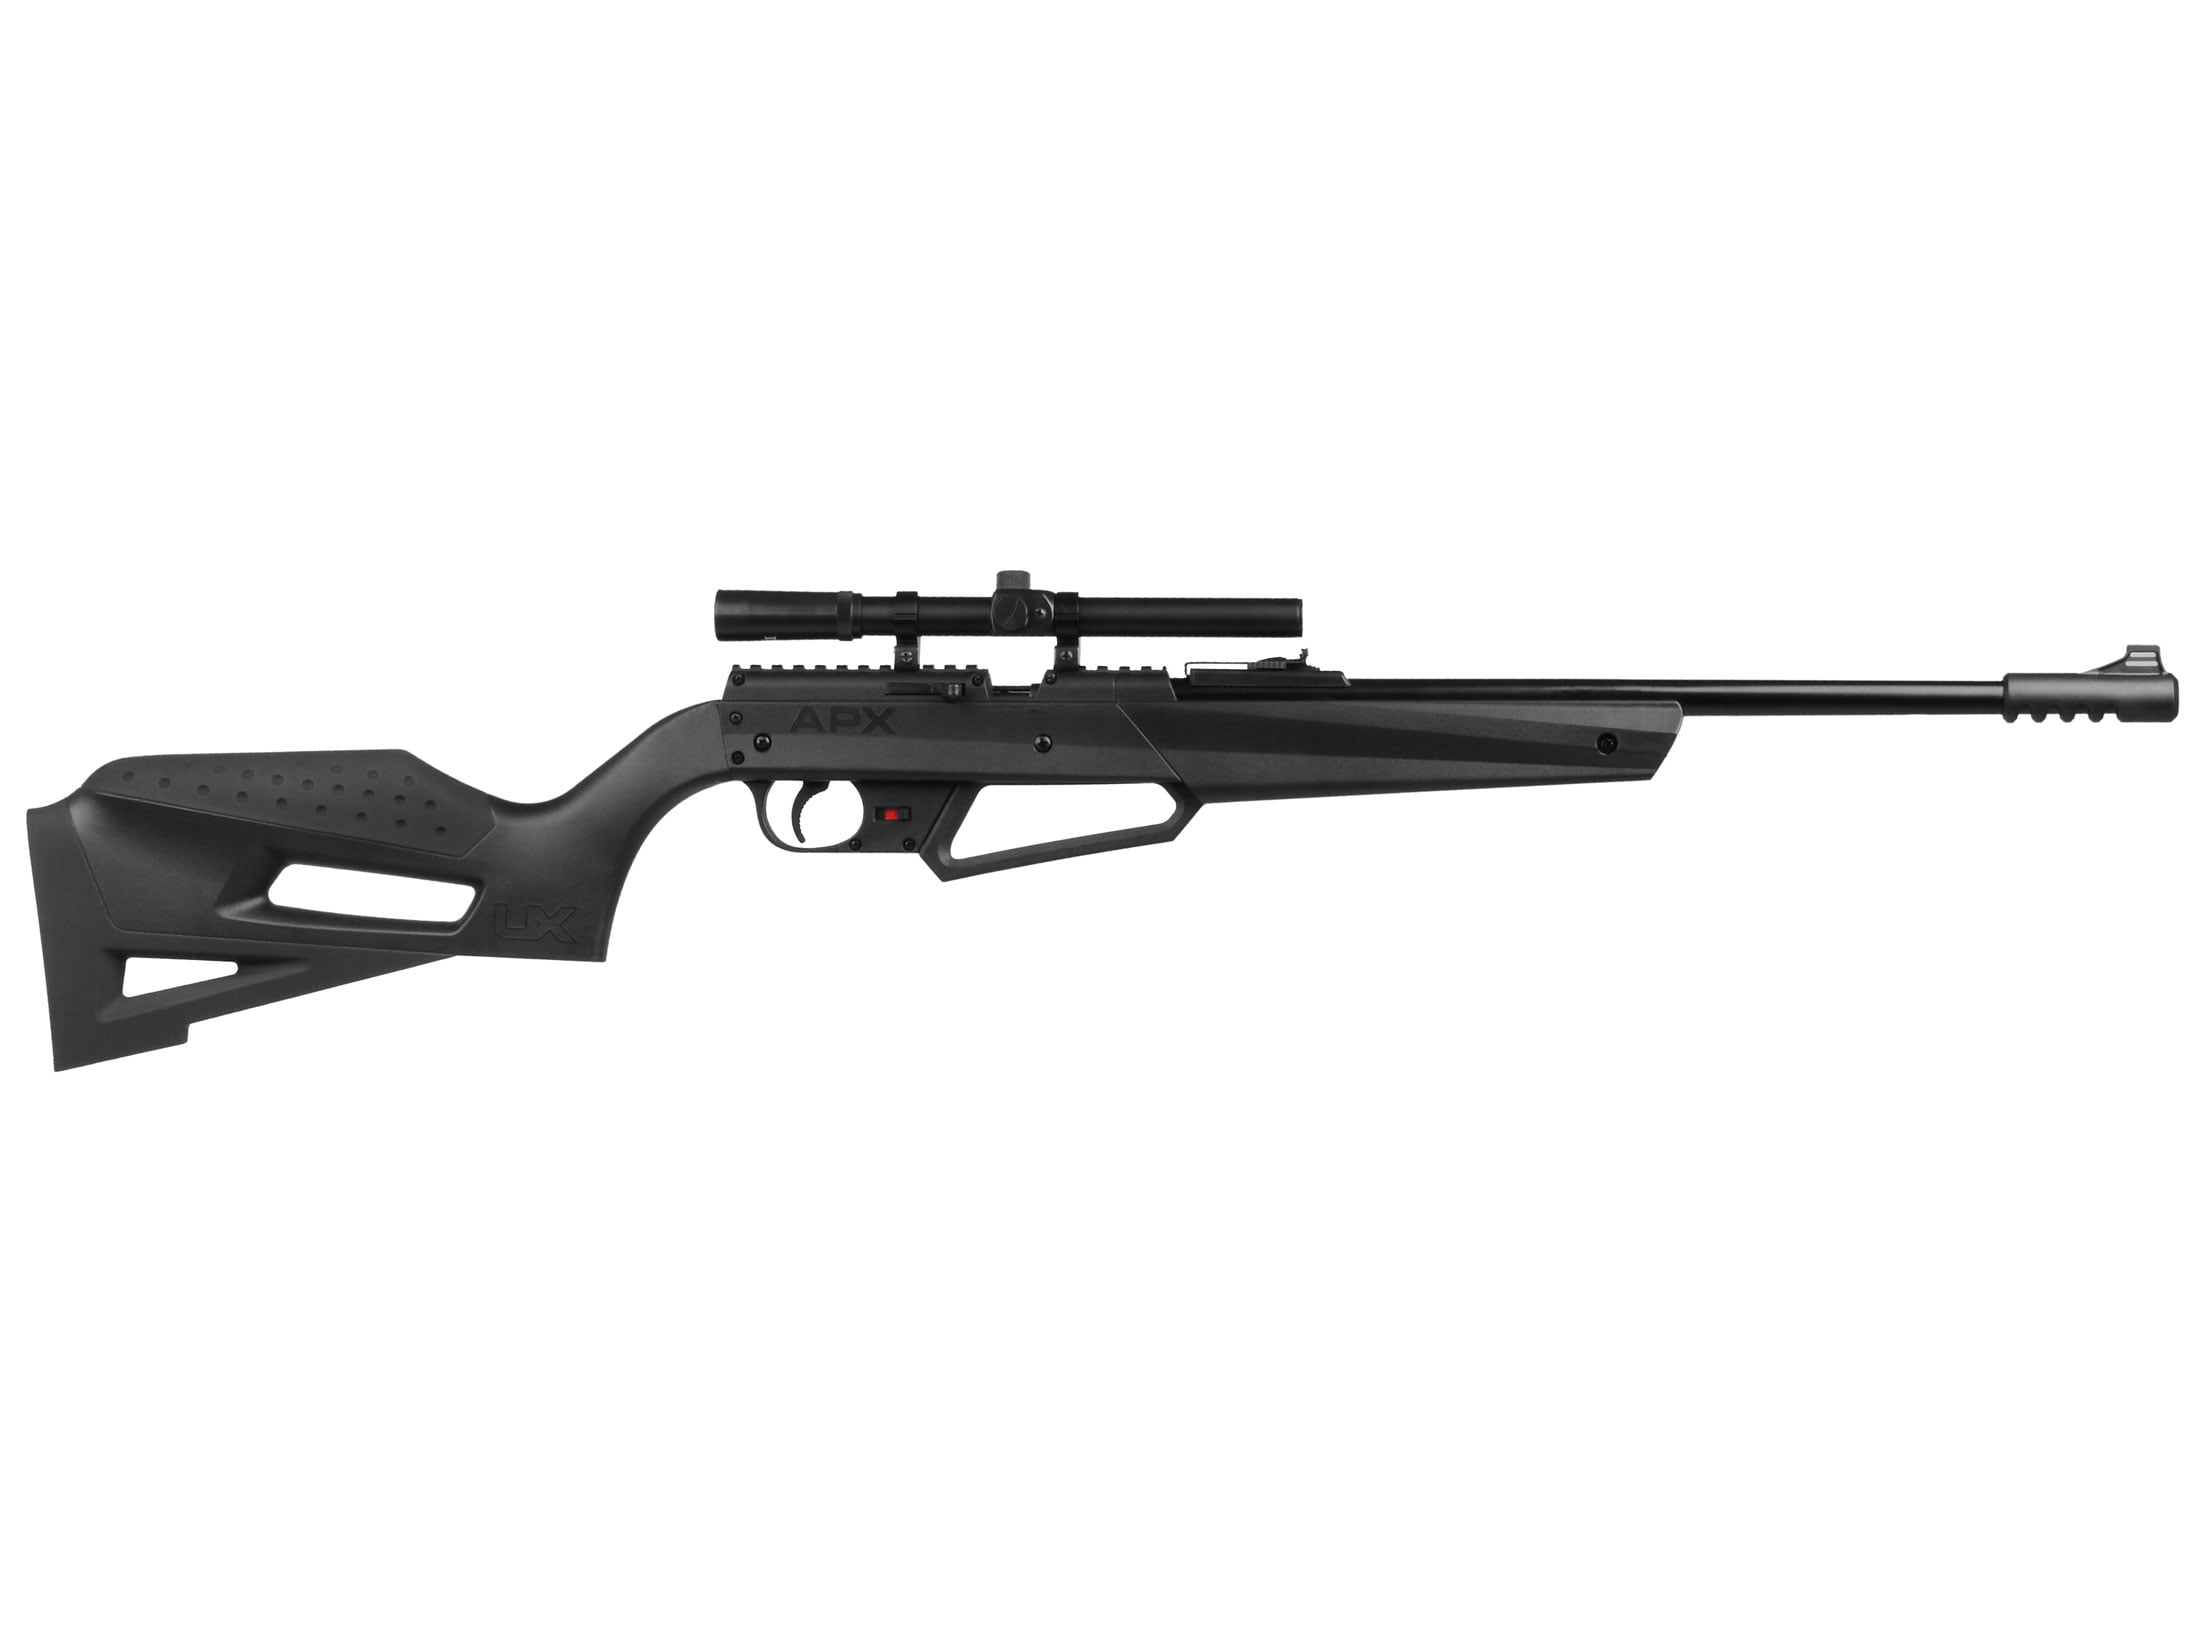 Umarex NXG APX Youth Pump 177 Caliber BB and Pellet Air Rifle with Scope For Sale